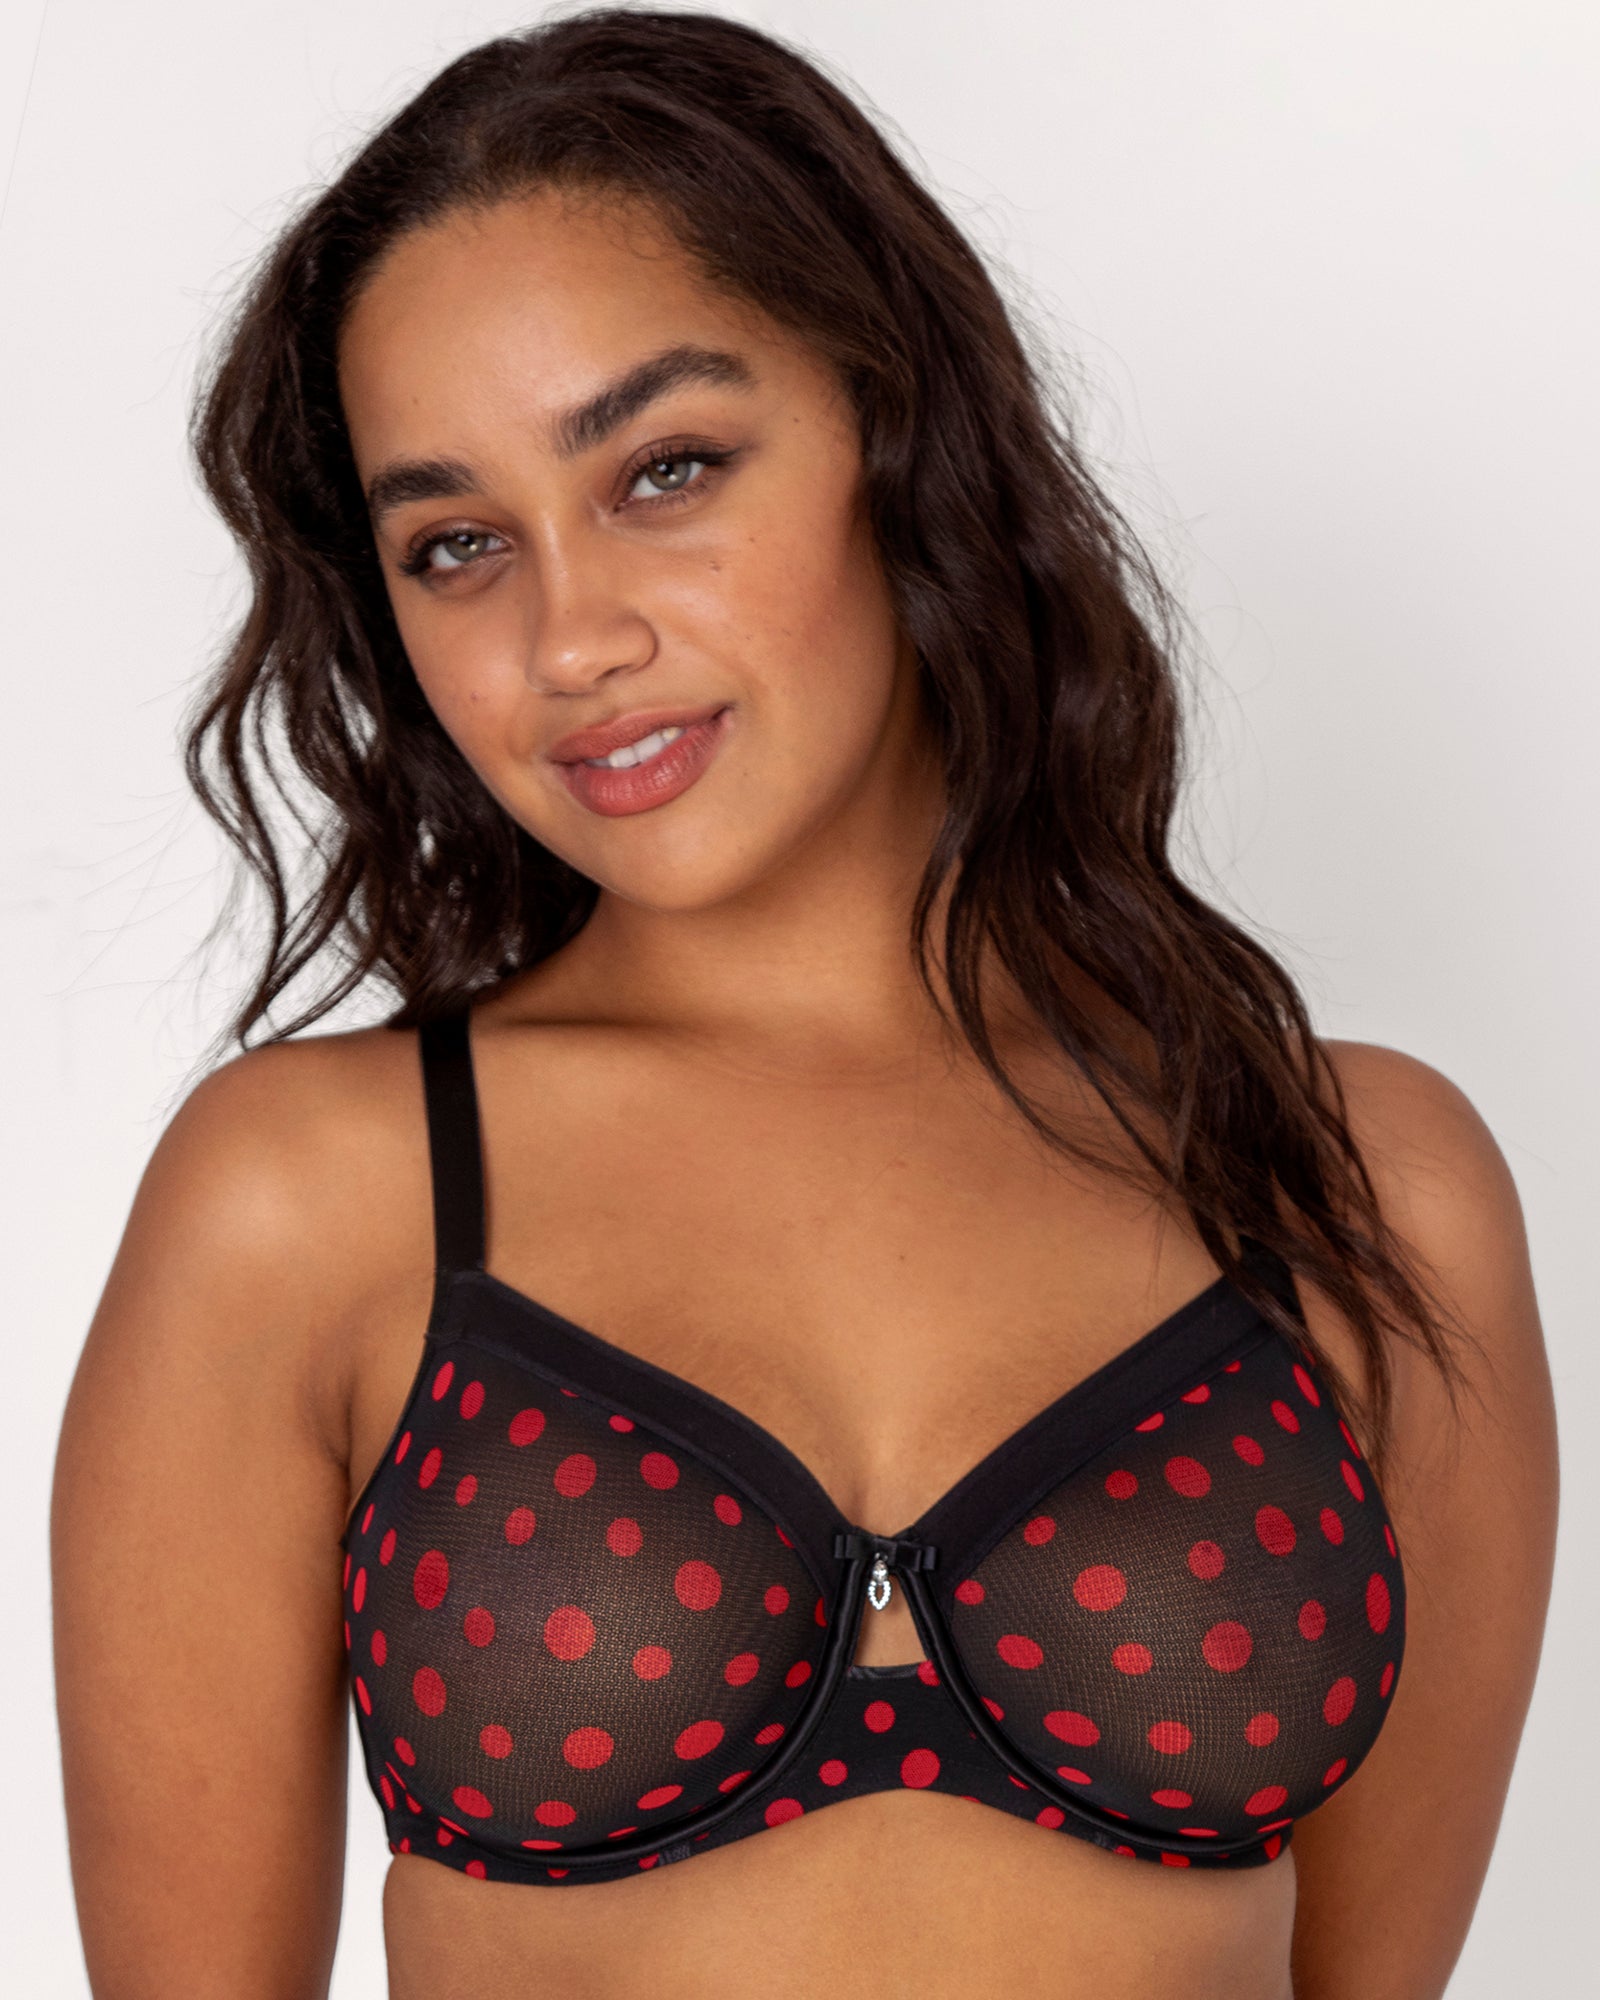 Curvy Couture Sheer Mesh Full Coverage Unlined Underwire Bra in Crantastic